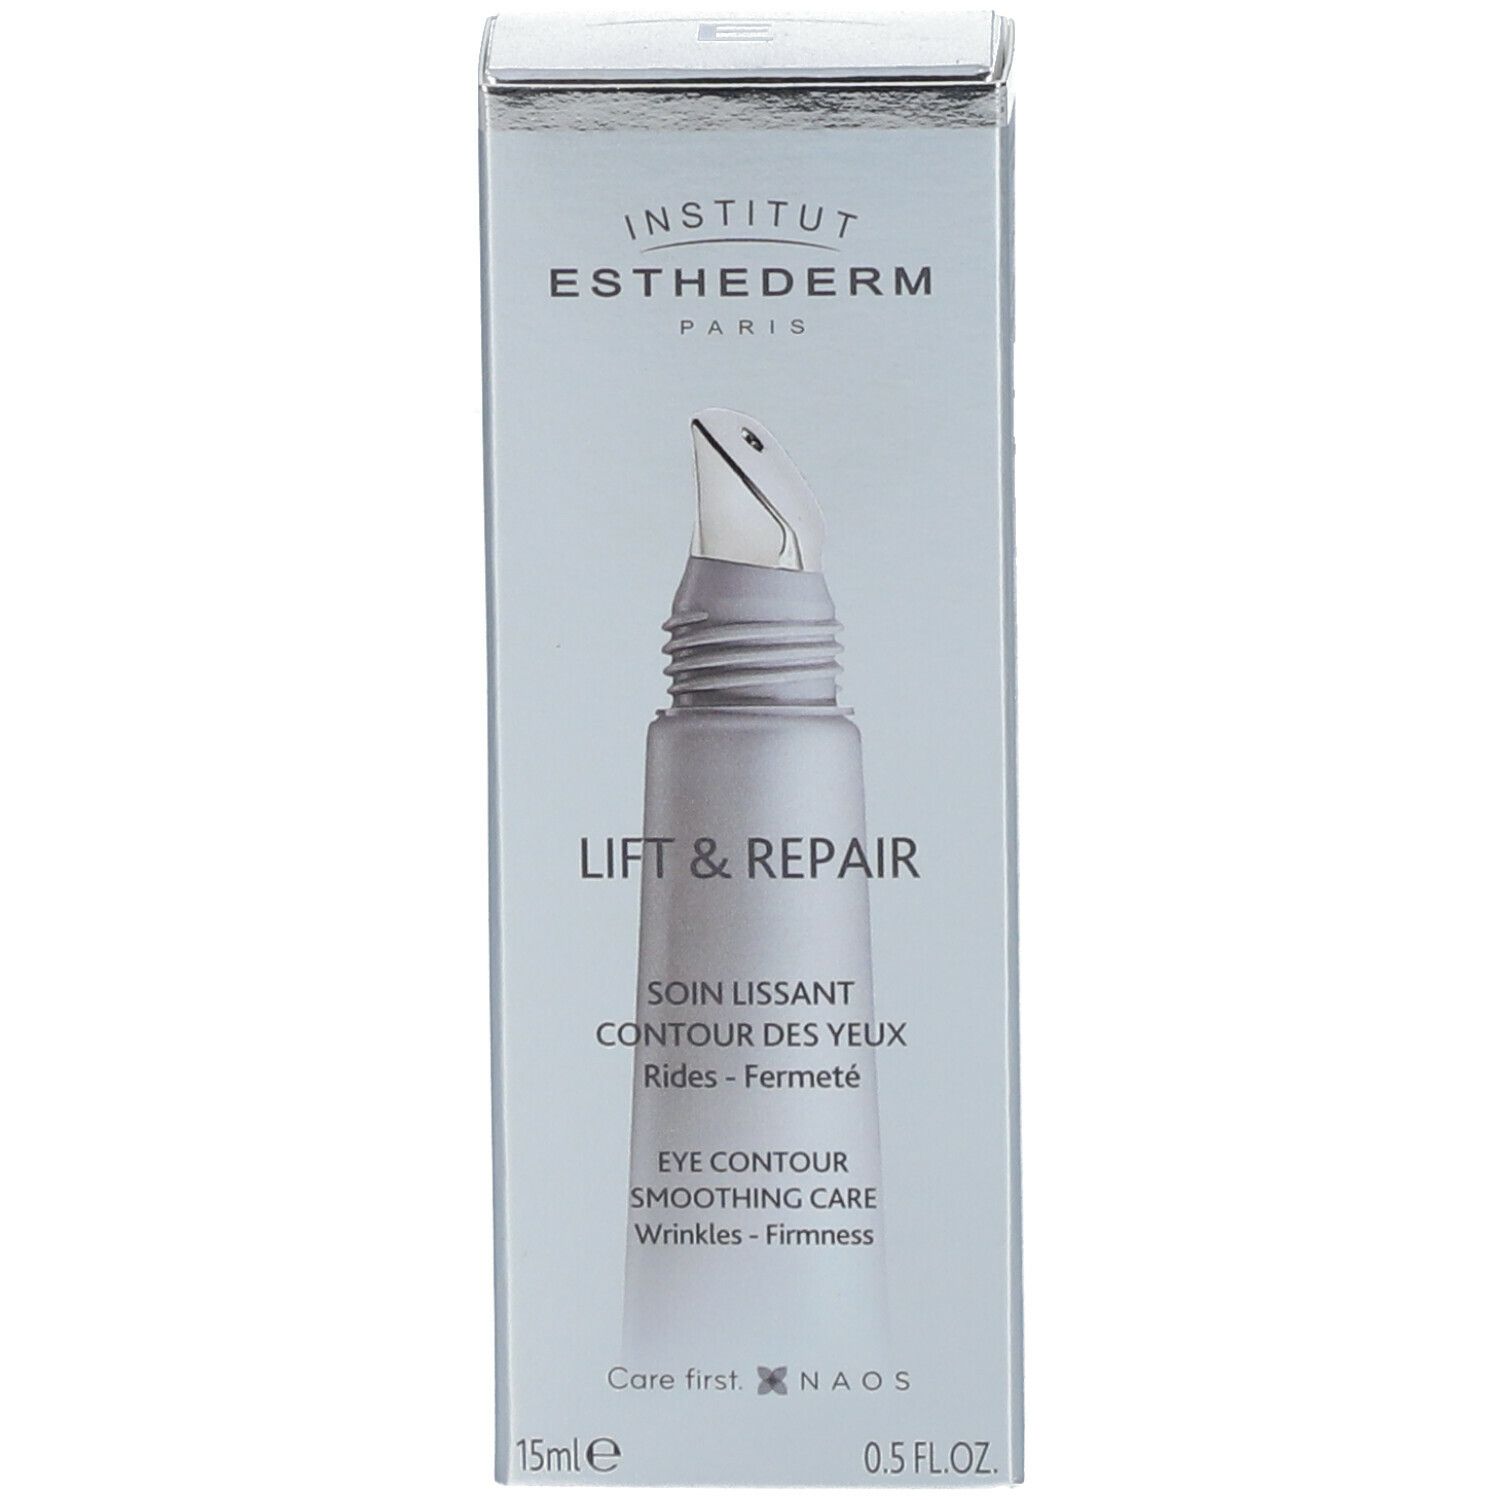 INSTITUT ESTHEDERM Lift & Repair Eye Contour Smoothing Care